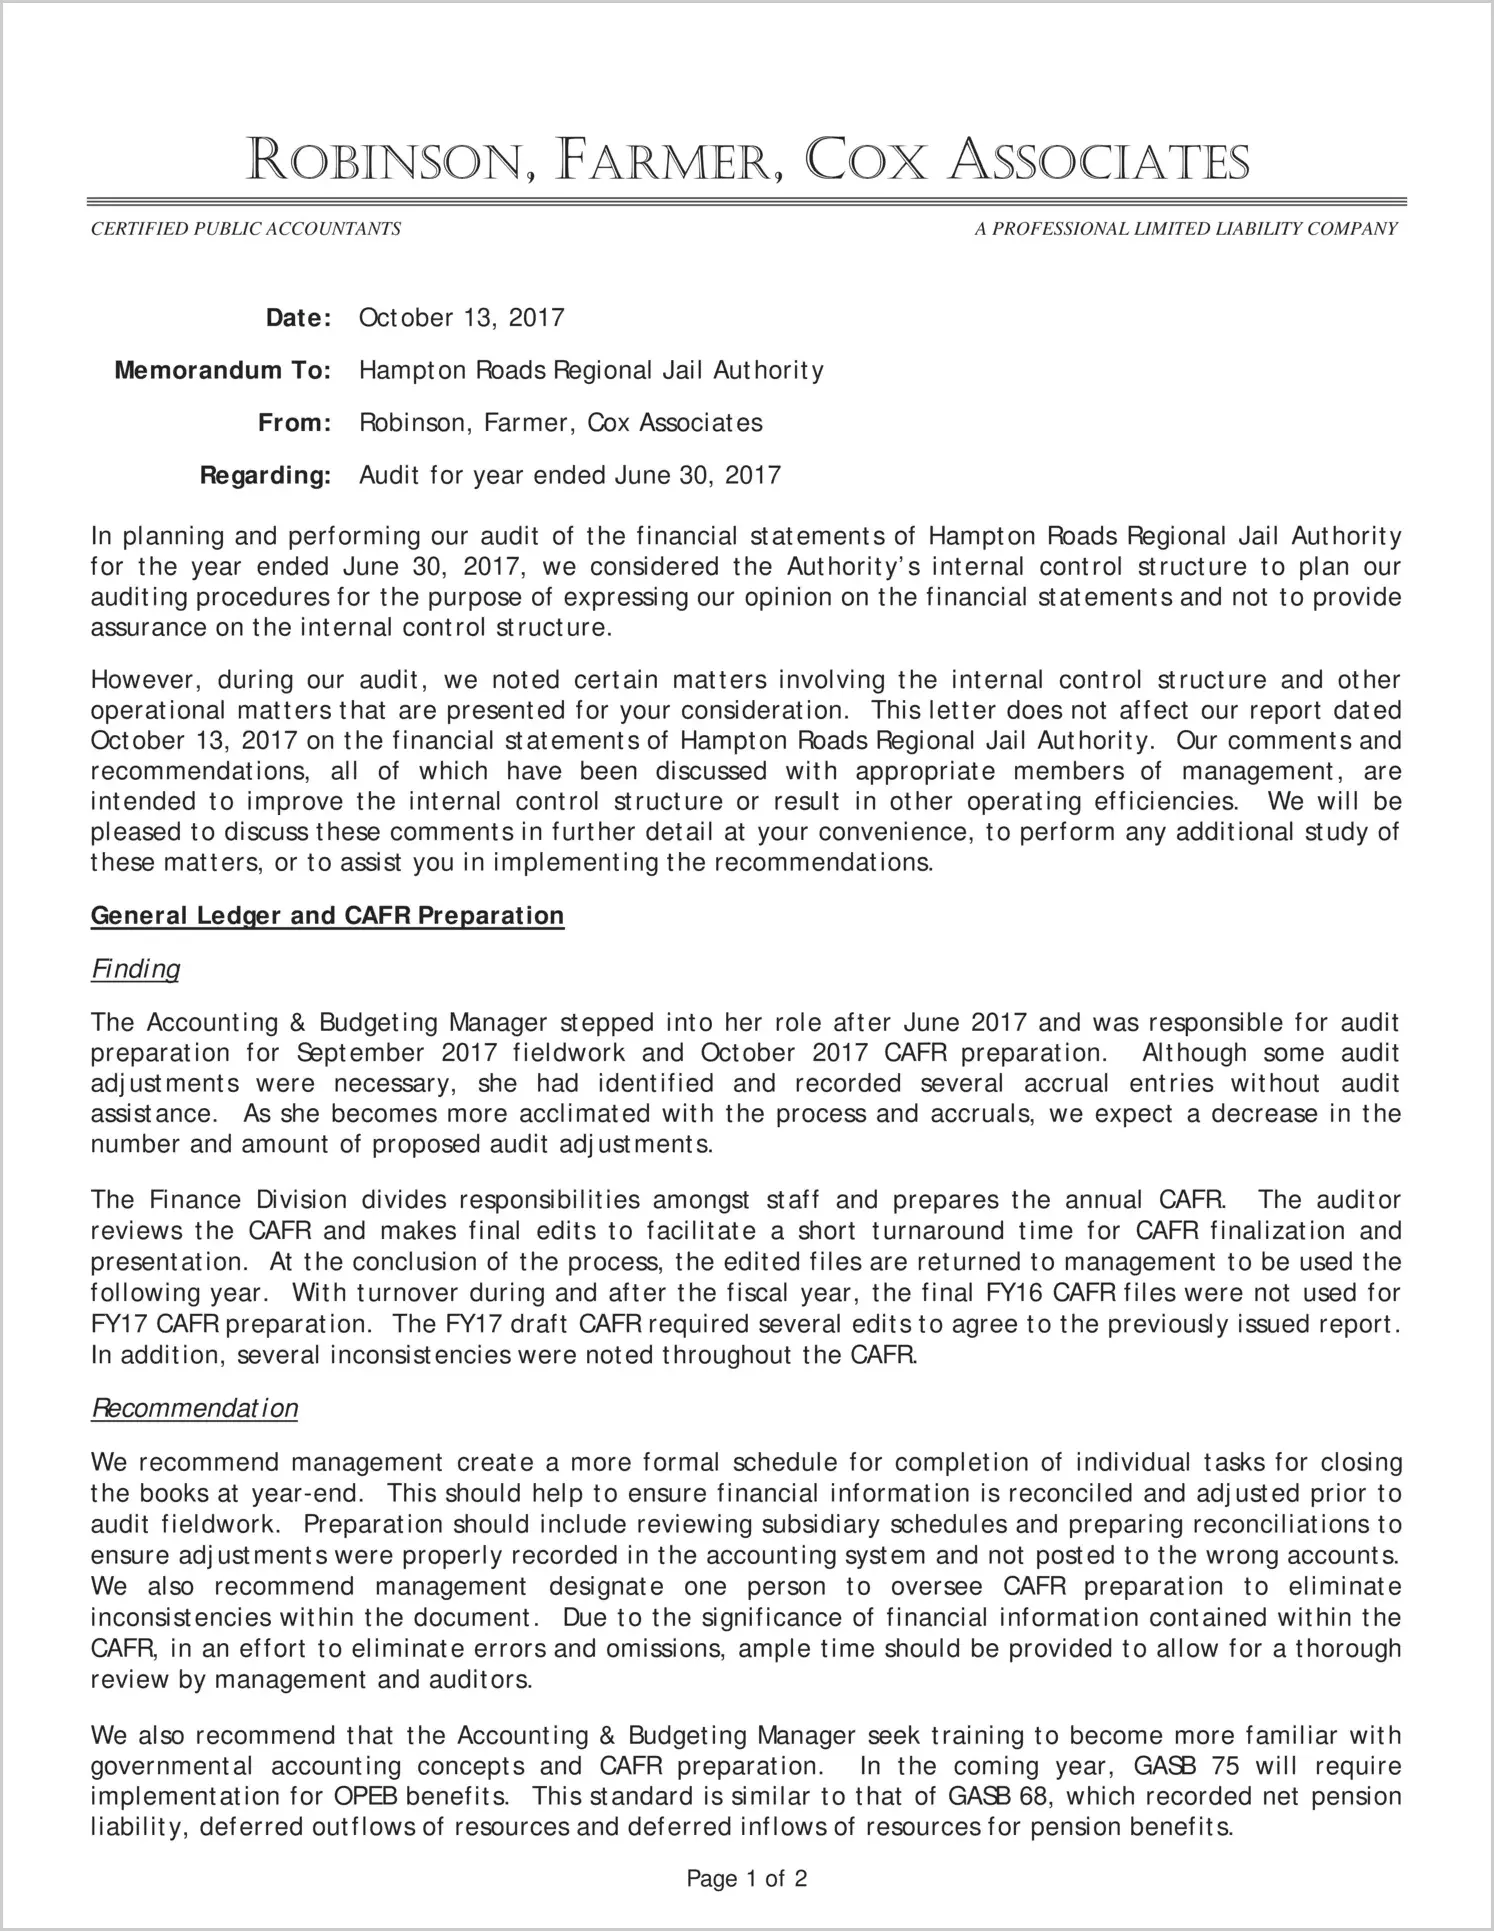 2017 ABC/Other Management Letter for Hampton Roads Regional Jail Authority